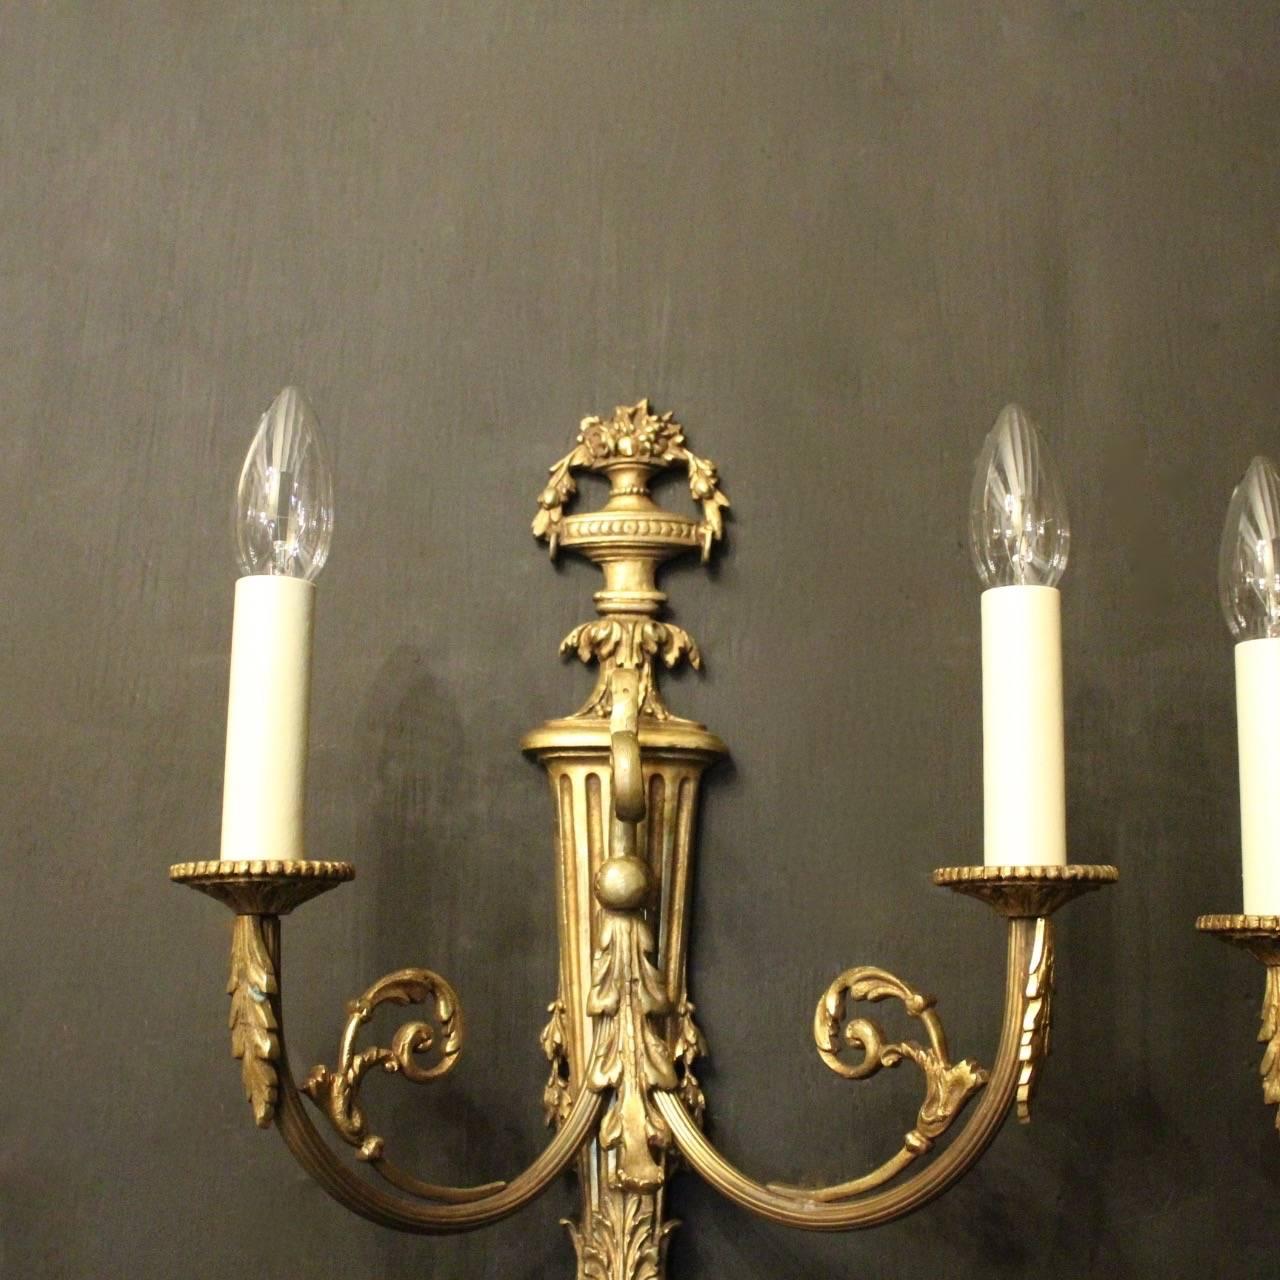 A French pair of gilded bronze twin arm antique wall sconces, the reeded scrolling arms with leaf circular bobeche drip pans, issuing from an ornate reeded tapering backplate with pierced floral urn finial, good original gilded patination and nice